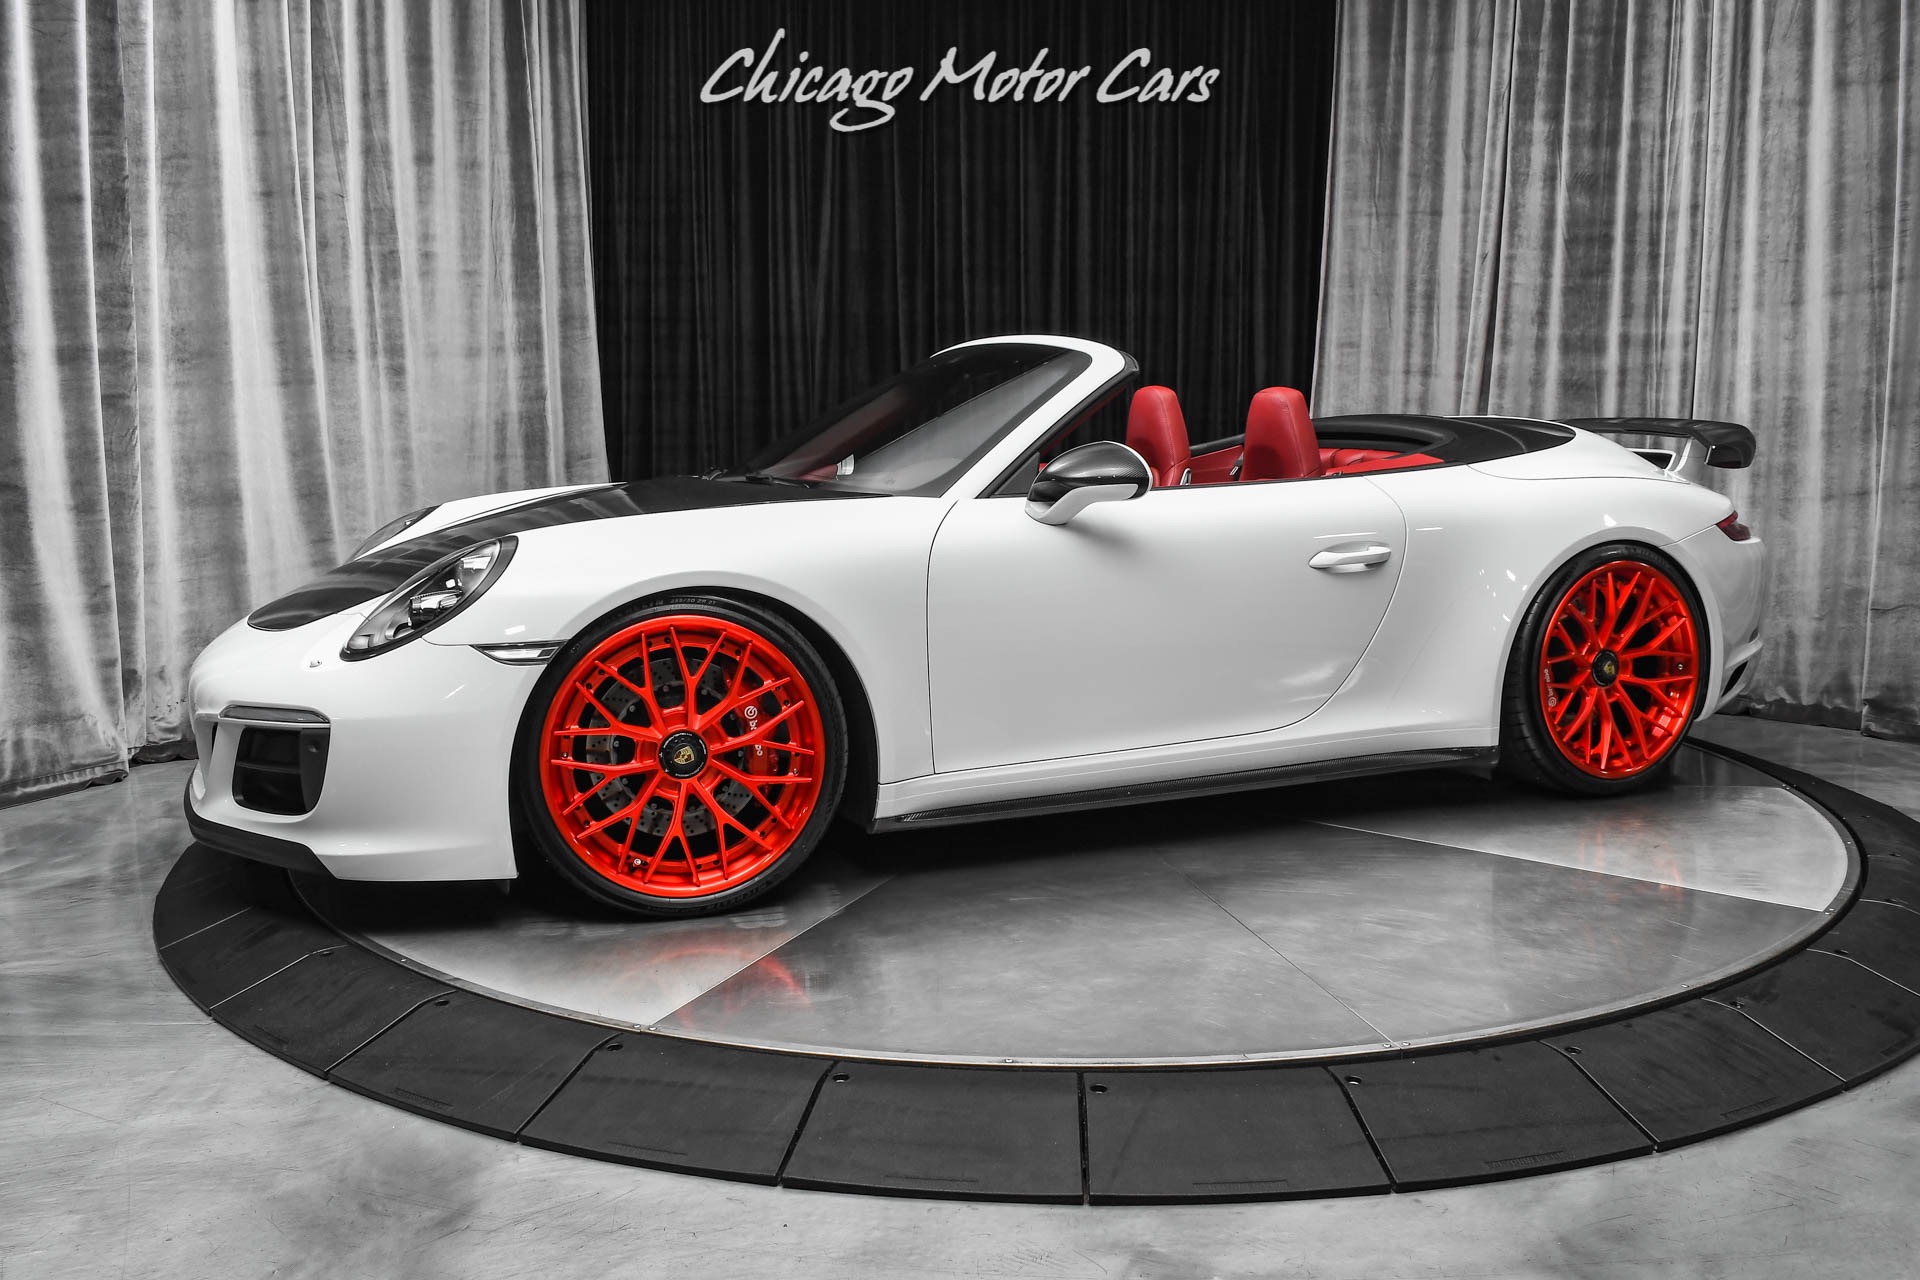 Used 2017 Porsche 911 Carrera 4 GTS Cabriolet 7-Speed Manual! OVER $50k IN  UPGRADES! TechArt Carbon Fiber! ANRKY Wheels! For Sale (Special Pricing) |  Chicago Motor Cars Stock #18273A